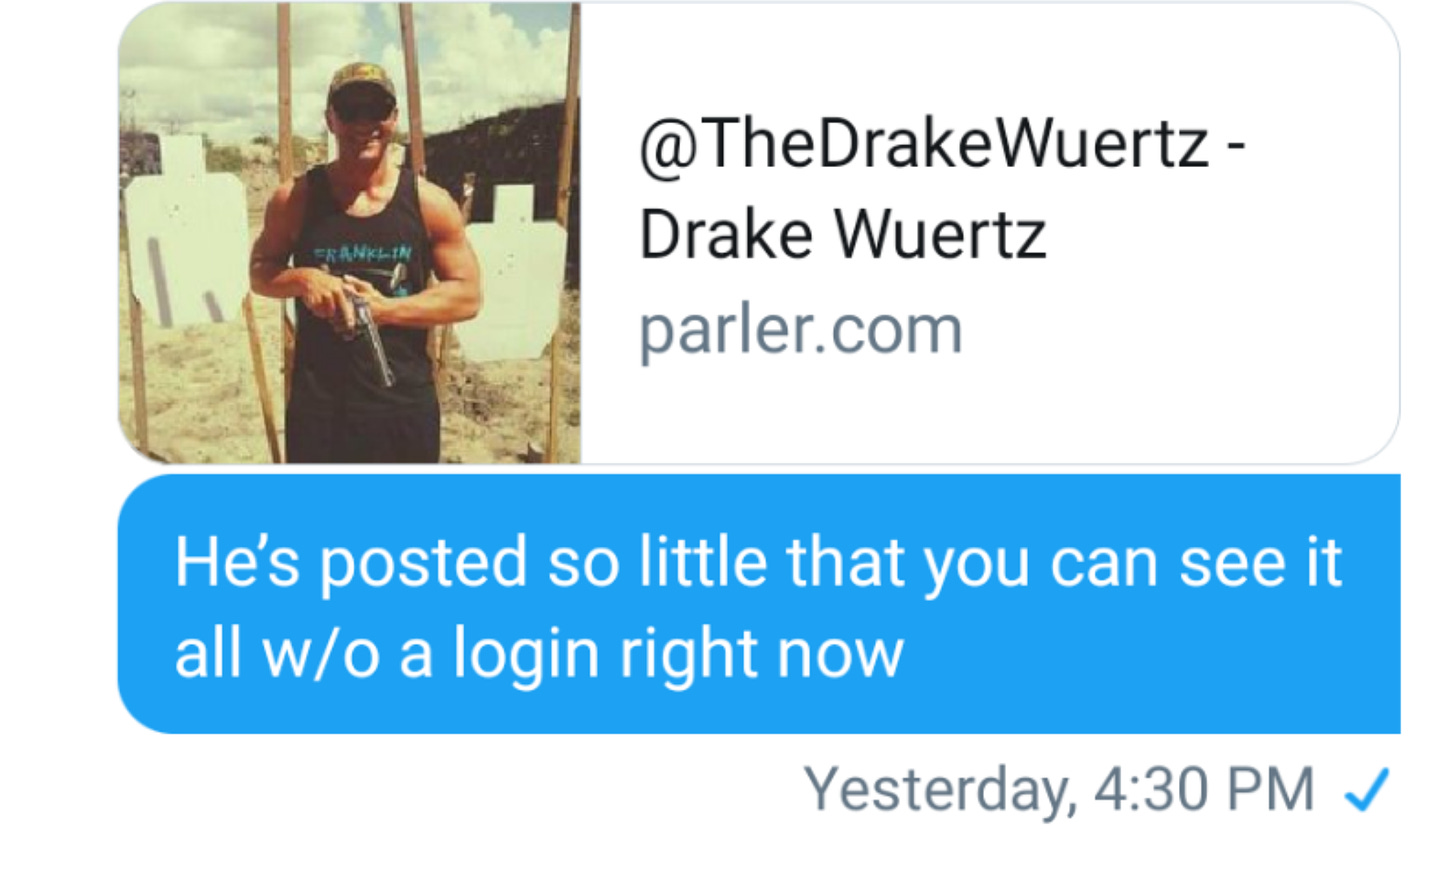 The only record I have at the moment of the @TheDrakeWuertz account on Parler, which disappeared within a day of being created. (Image: Twitter DM screenshot.)